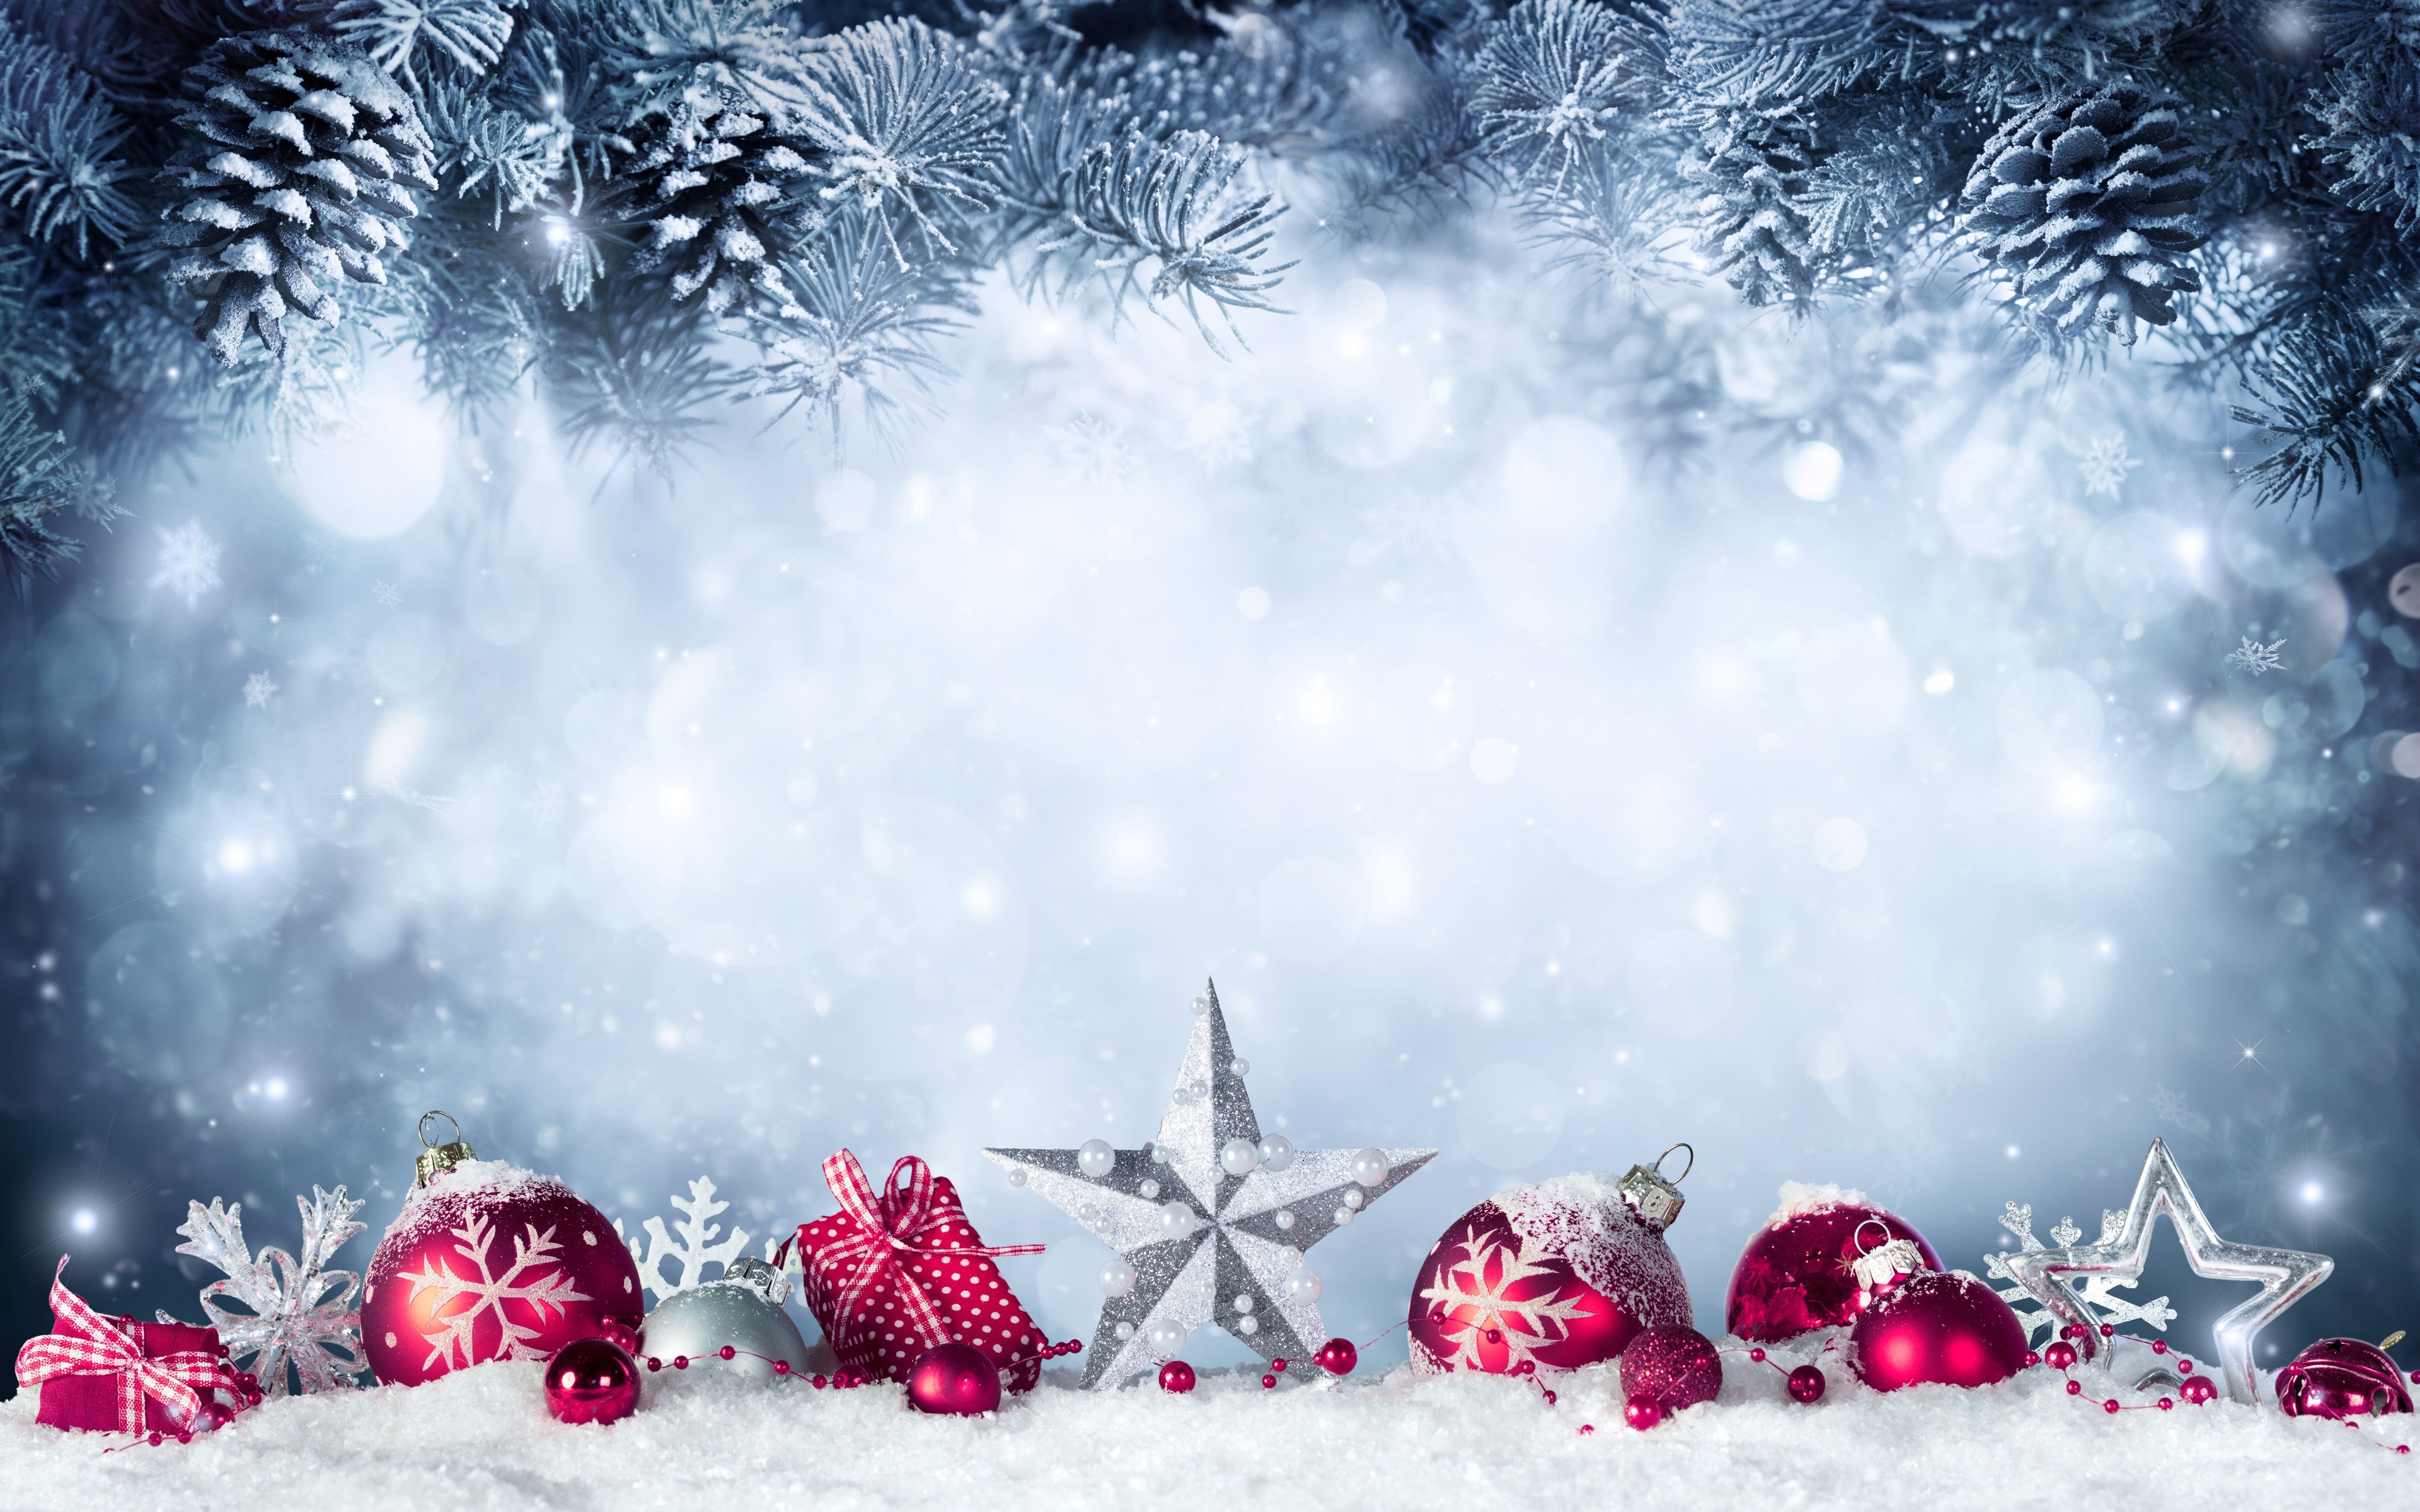 Download wallpaper Merry Christmas, 4k, snow, new year decorations, xmas balls, Happy New Year, christmas decorations, New Years concerts, xmas decorations for desktop with resolution 3840x2400. High Quality HD picture wallpaper